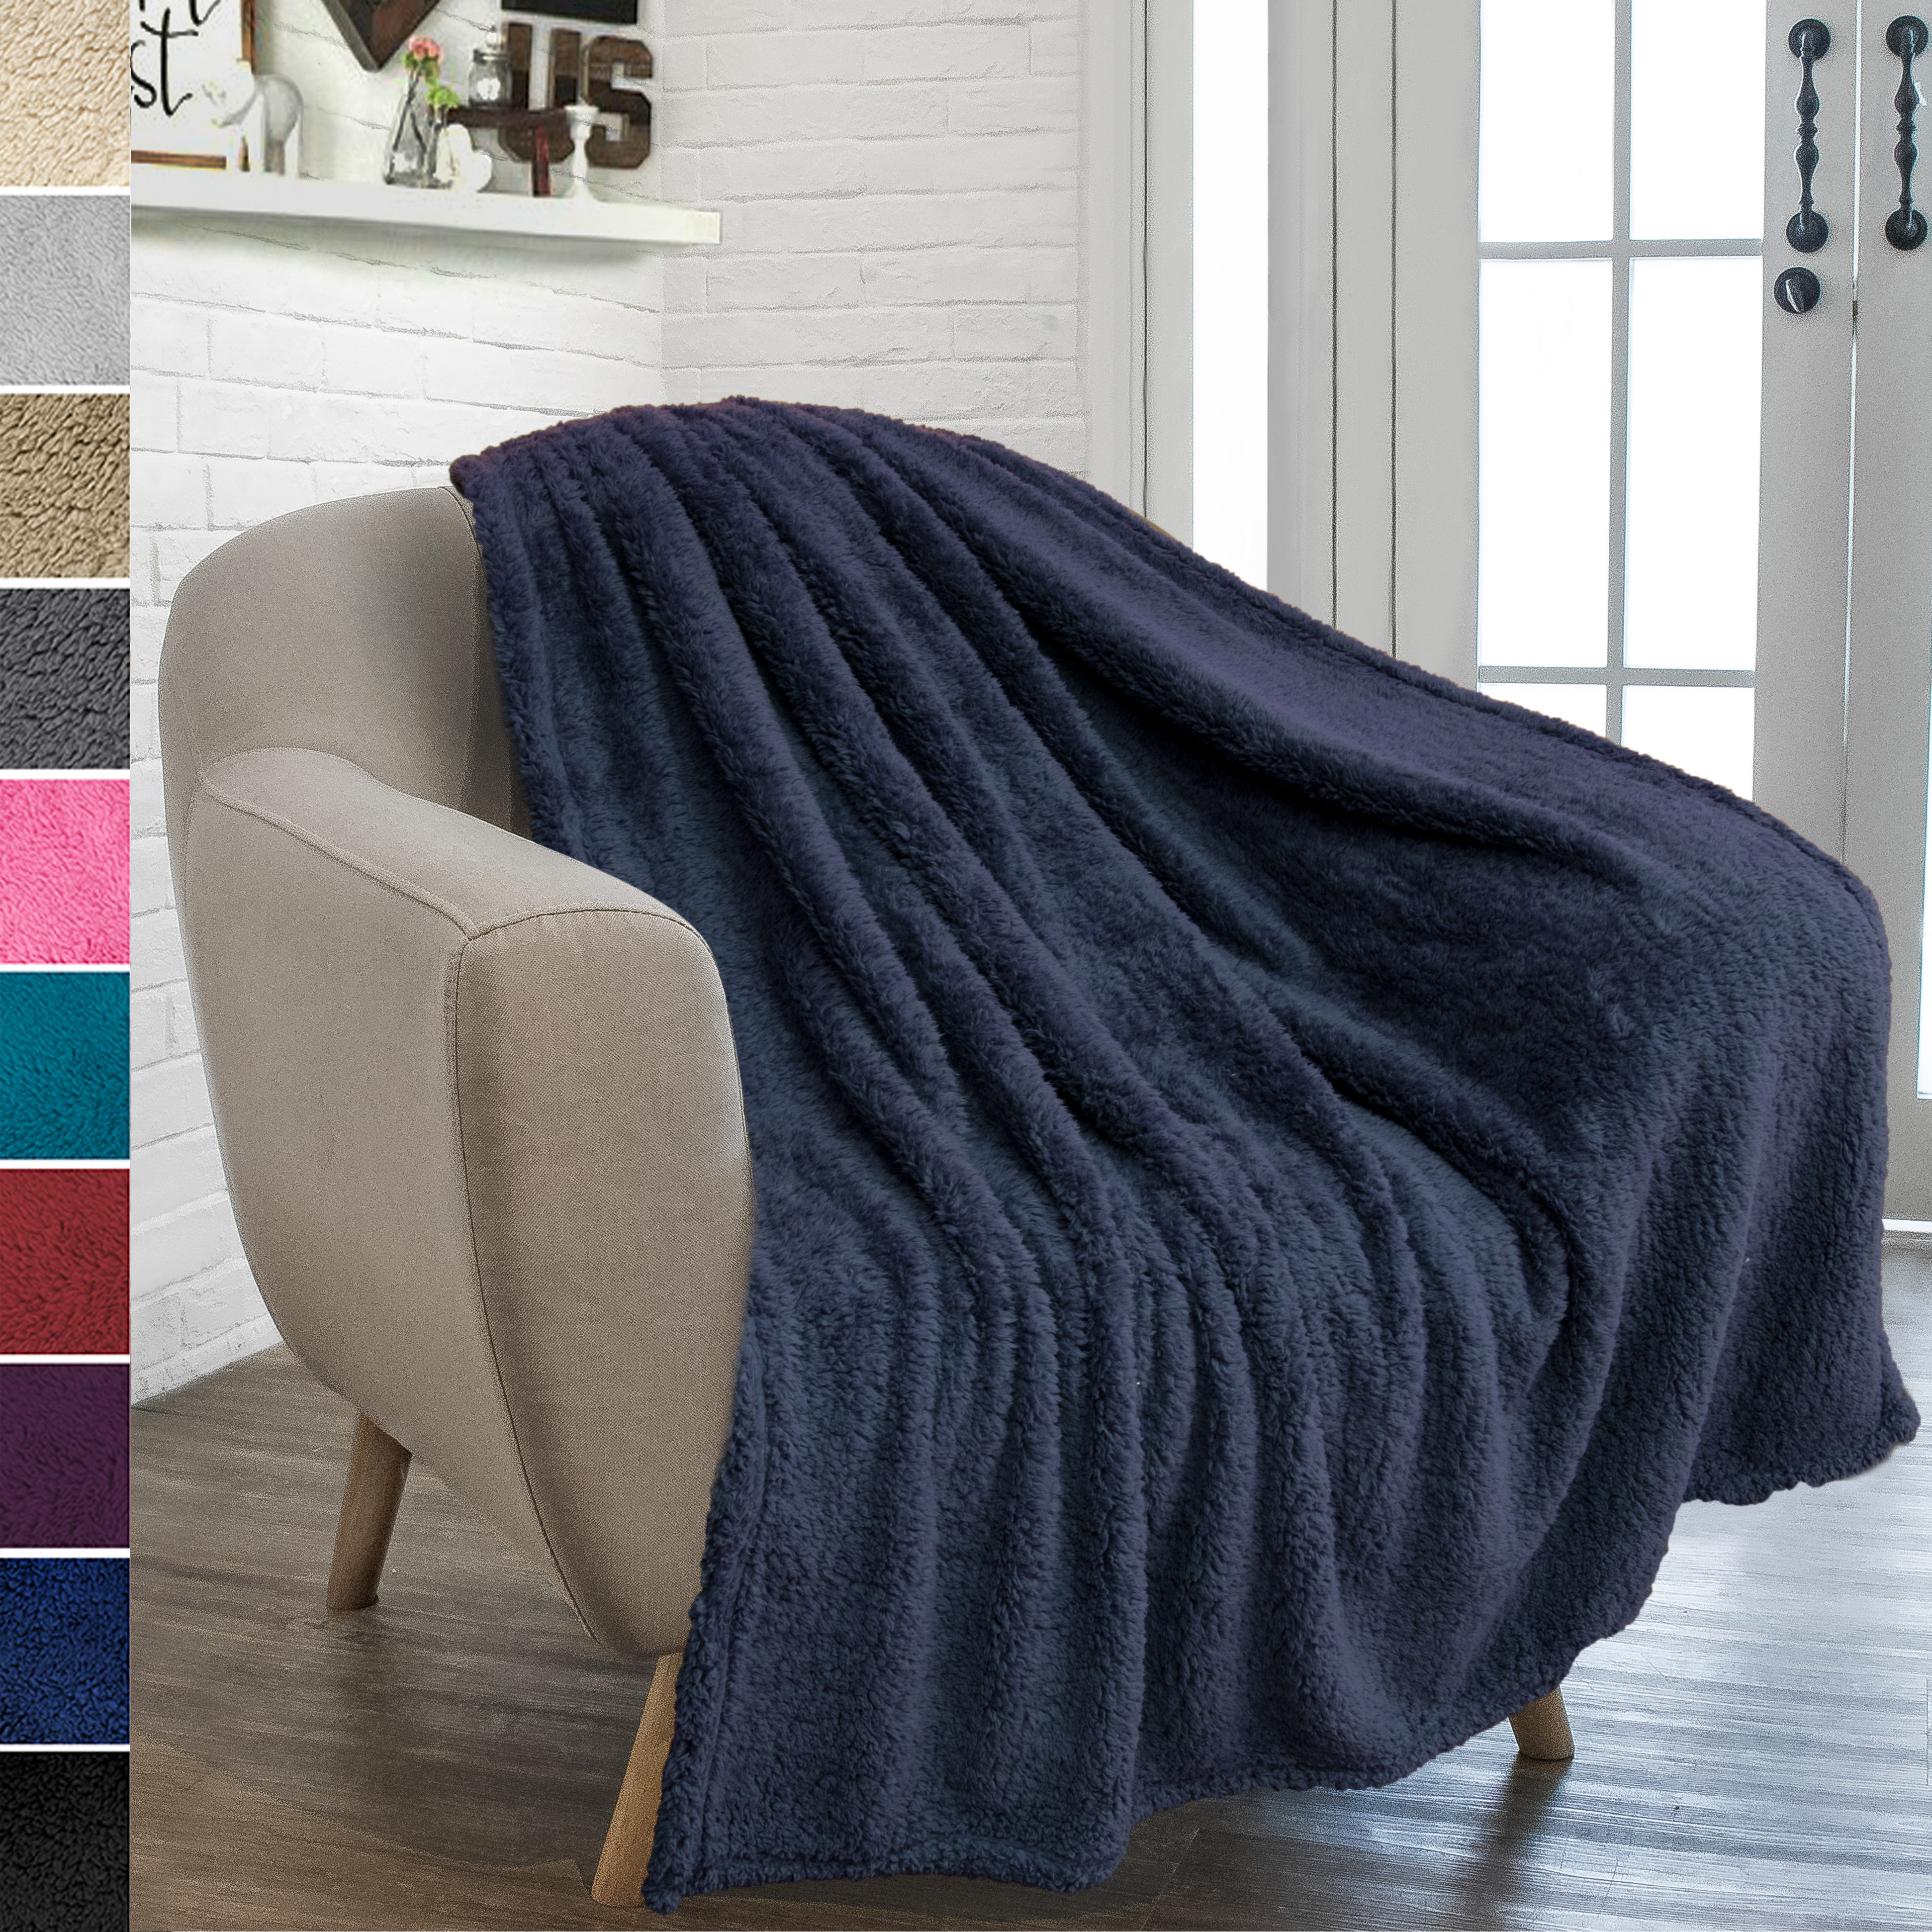 He Saved Us Not Because of The Good Things Premium Quality Sherpa Fleece Throw Blanket 3D Printed Warm Fluffy Cozy Soft Tv Bed Couch Comfy Microfiber Velvet Plush 